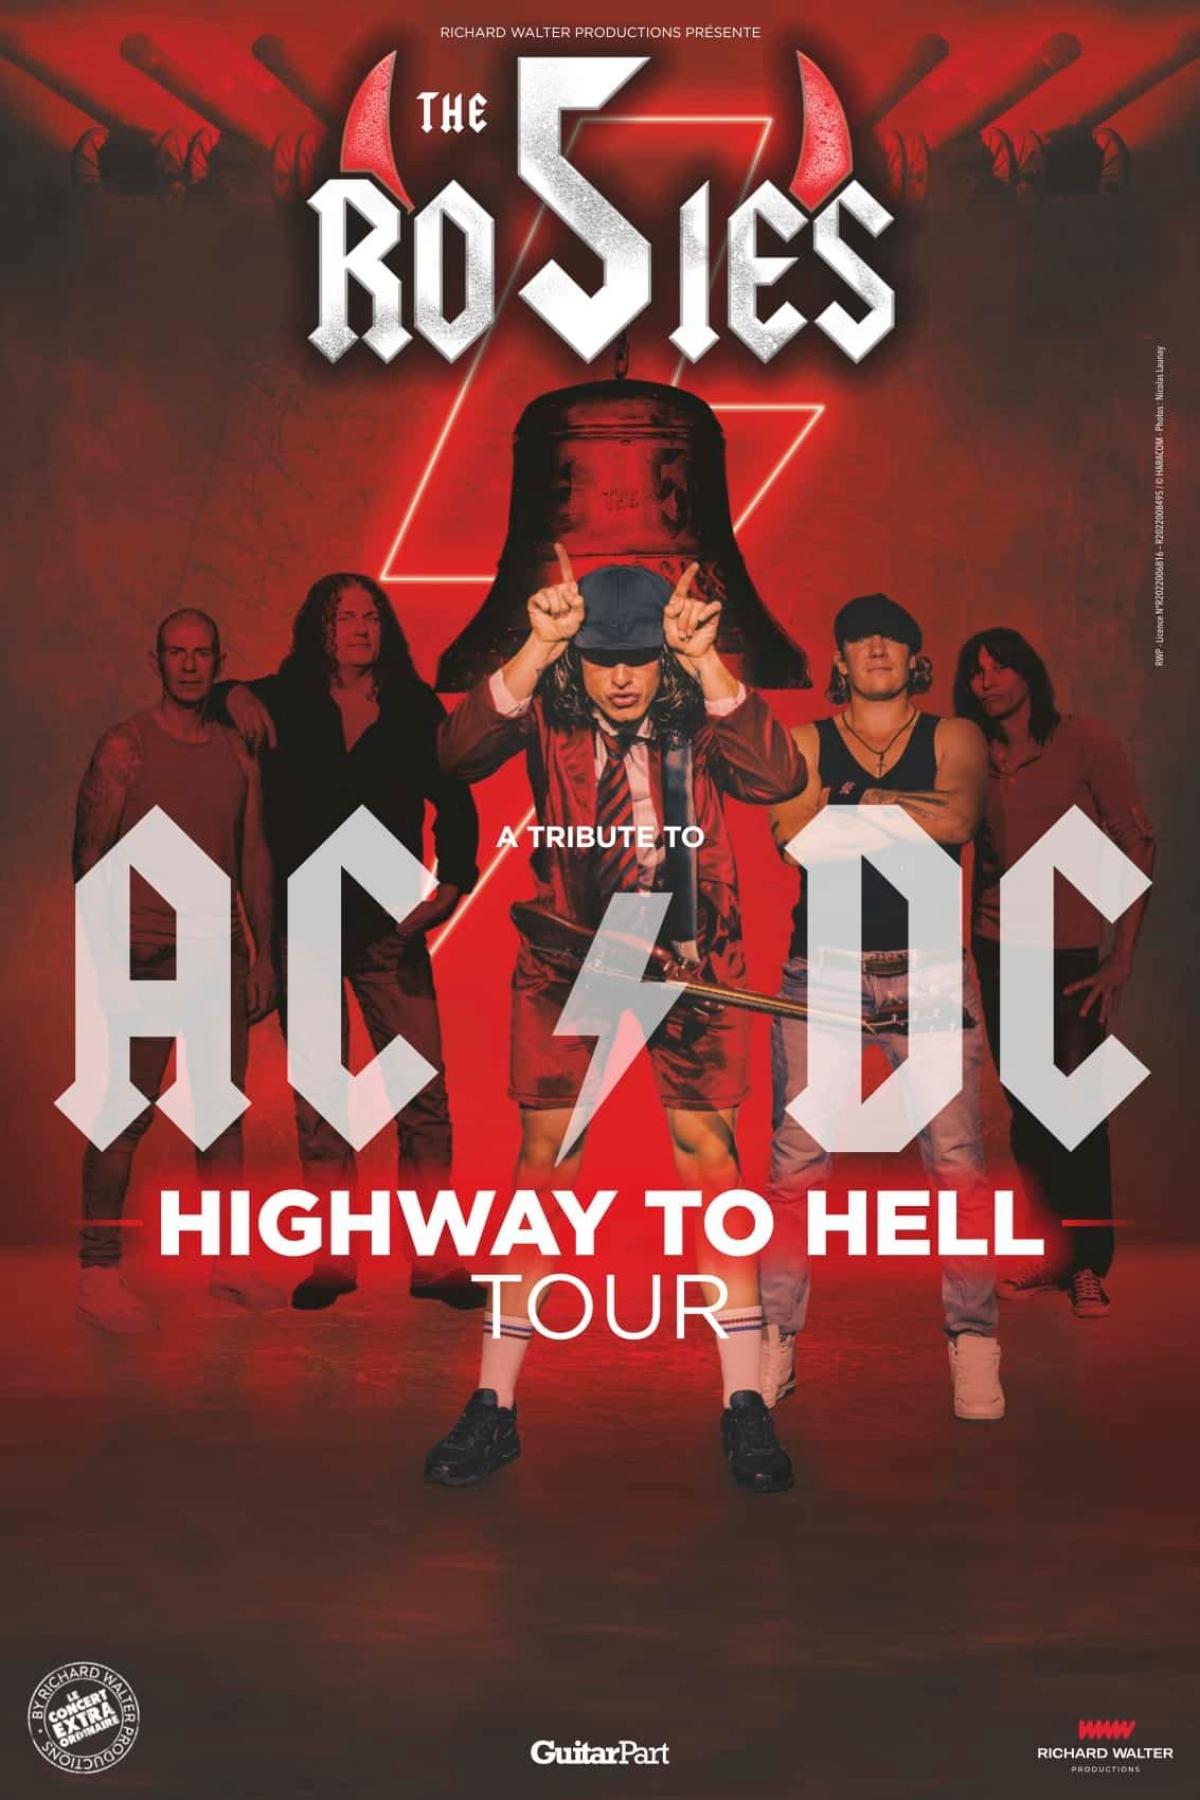 The 5 Rosies - Highway To Hell Tour at Rockstore Tickets